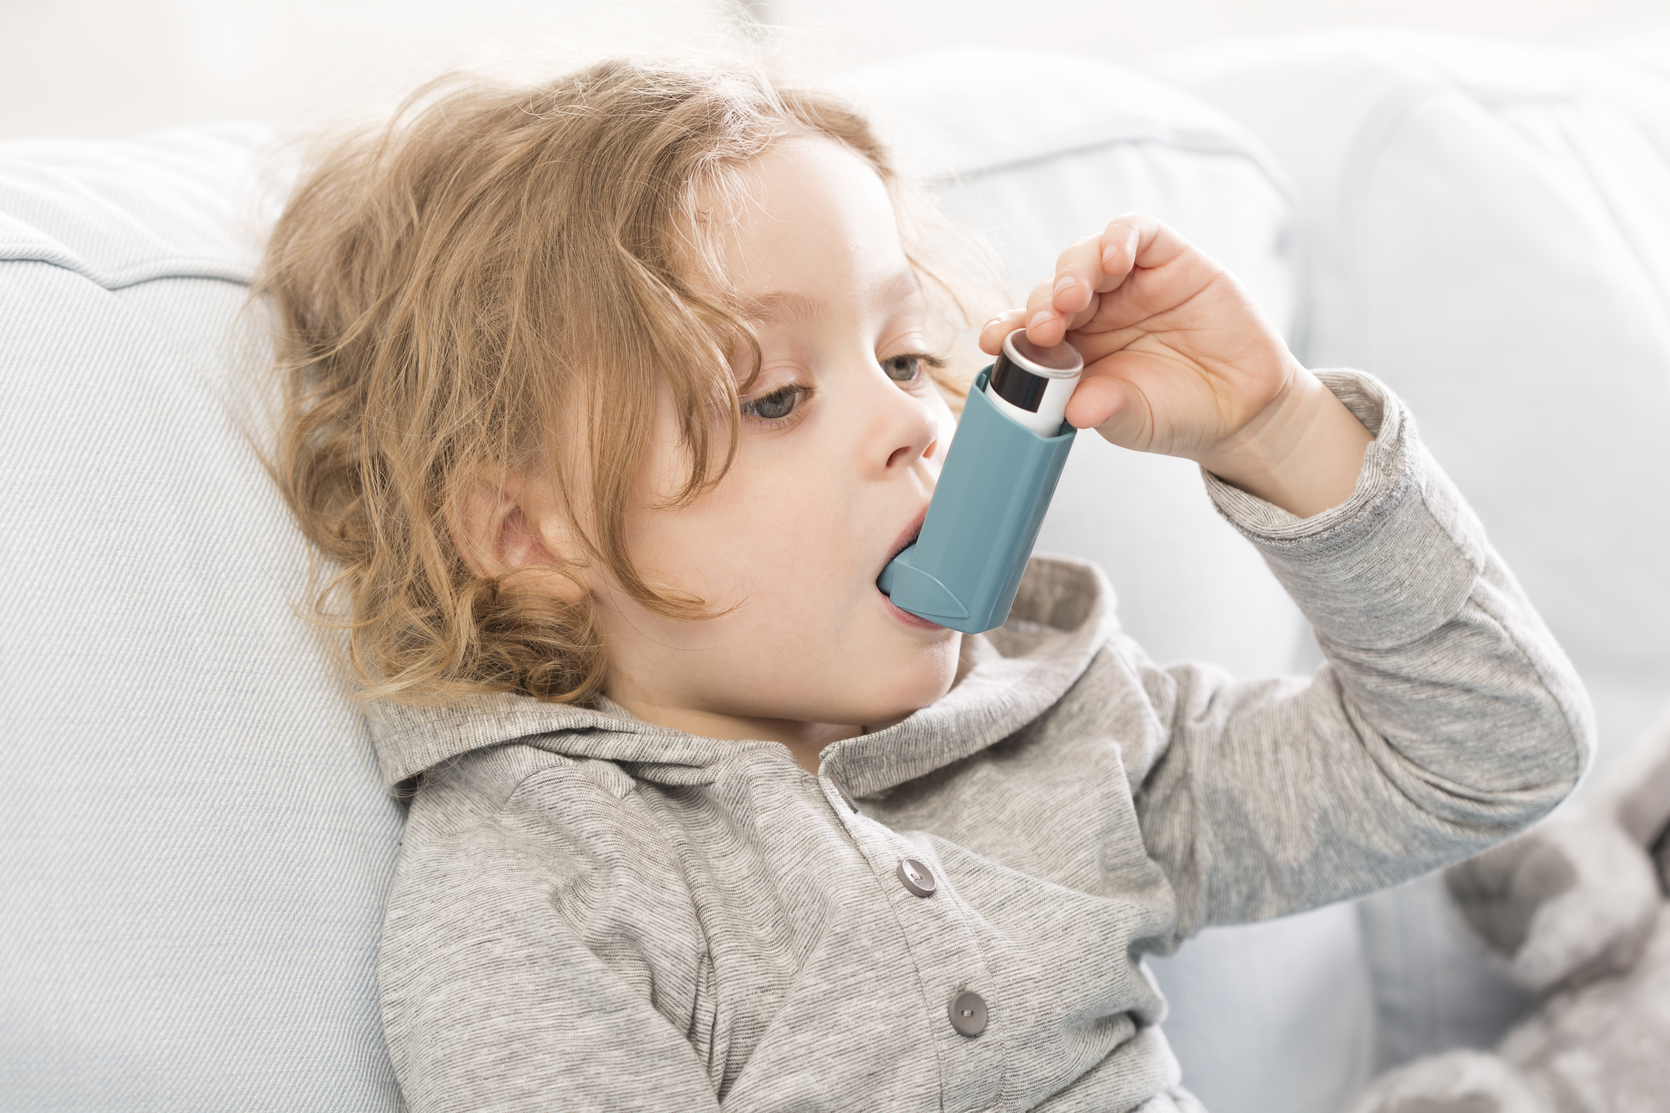 An Investigation into the Effect of Multimedia Training on the Knowledge and Self-Efficacy of Children with Asthma